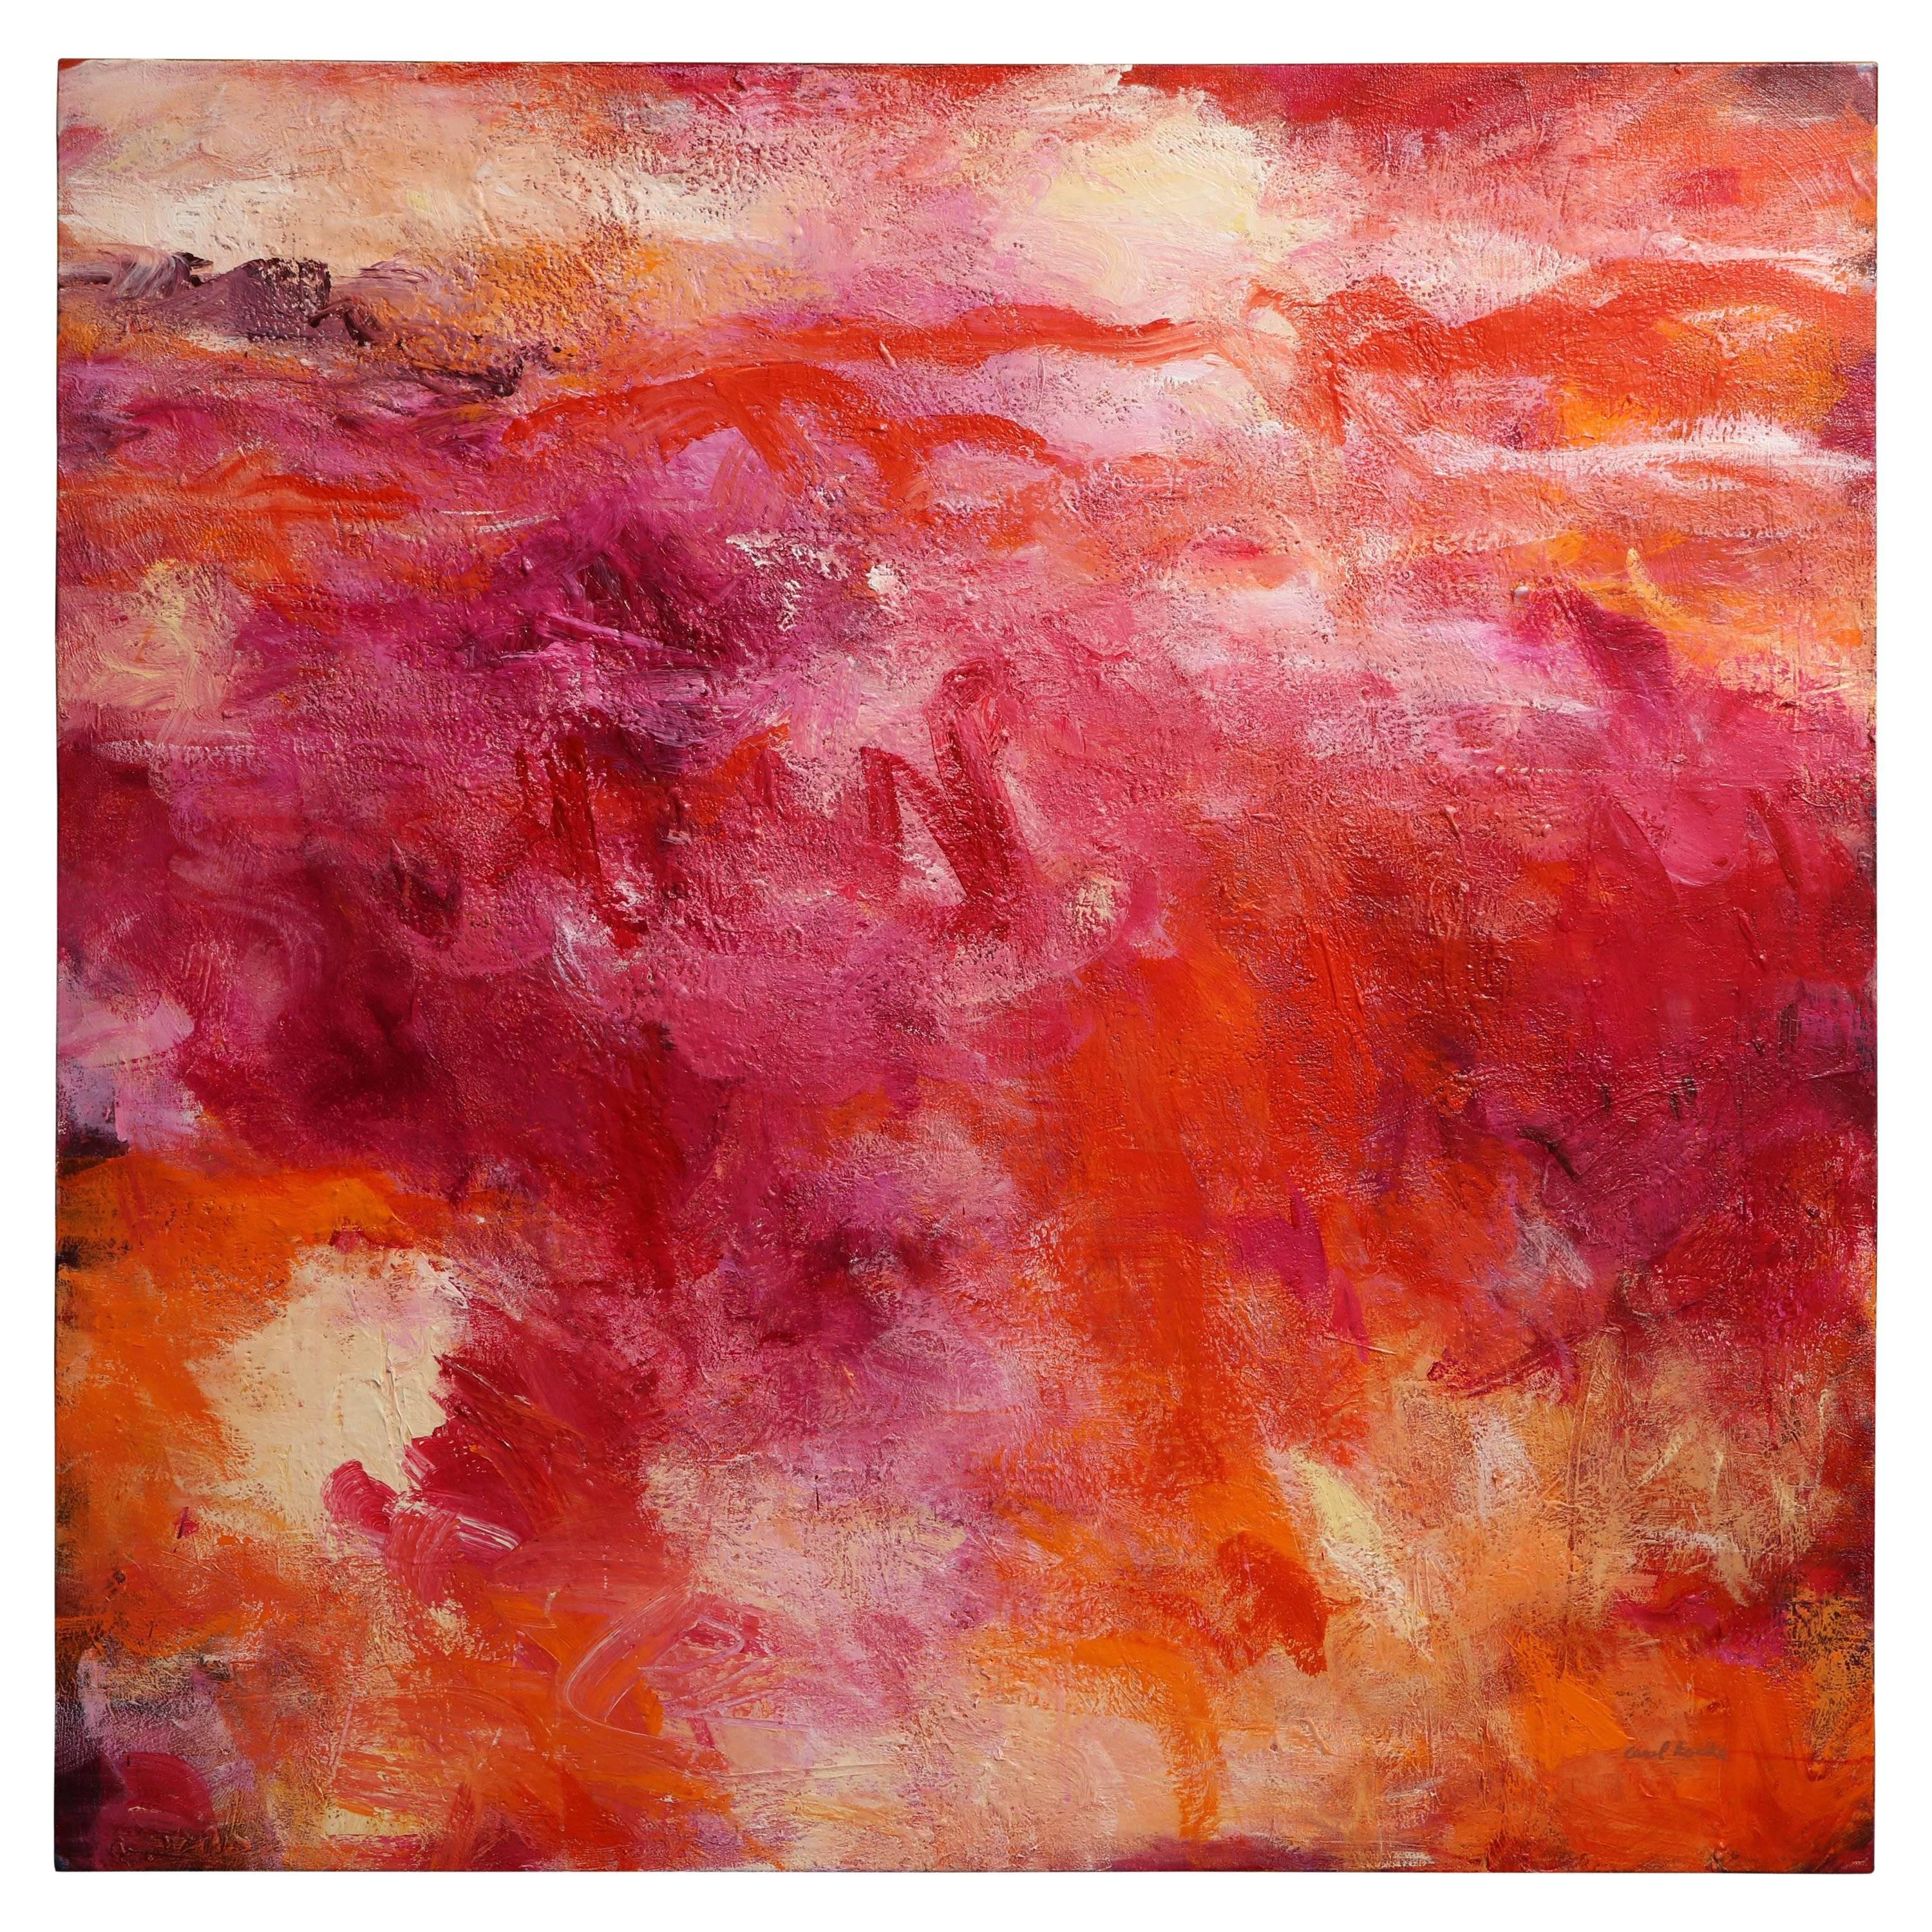 The Australian artist, Carol Roche has defined her artwork bold and underlined. Outback Country 11 is the Outback of Australia which is mostly desert and red earth which it is sometimes called &quot;The Red Centre&quot;. 
Her inspiration for the